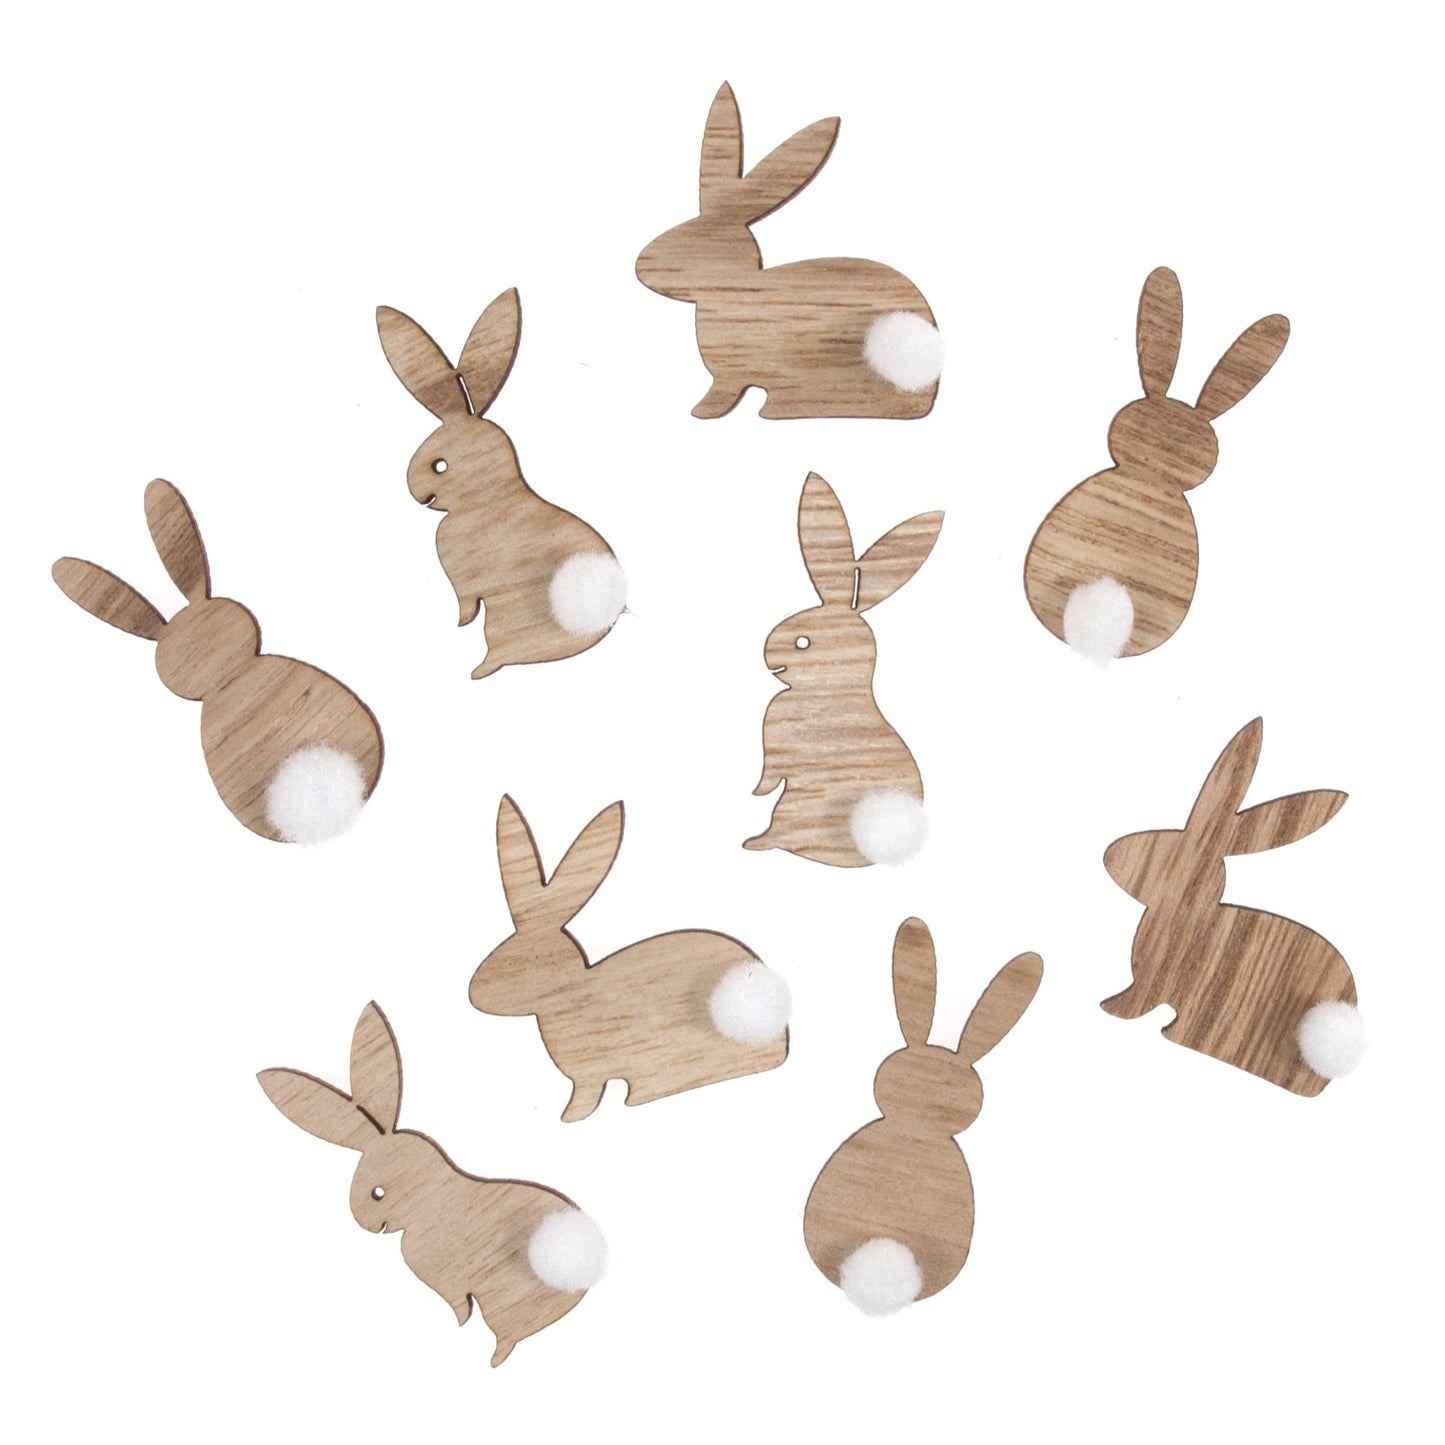 CRAFT EMBELLISHMENTS - WOODEN FLUFFY TAIL RABBIT - Pack of 9